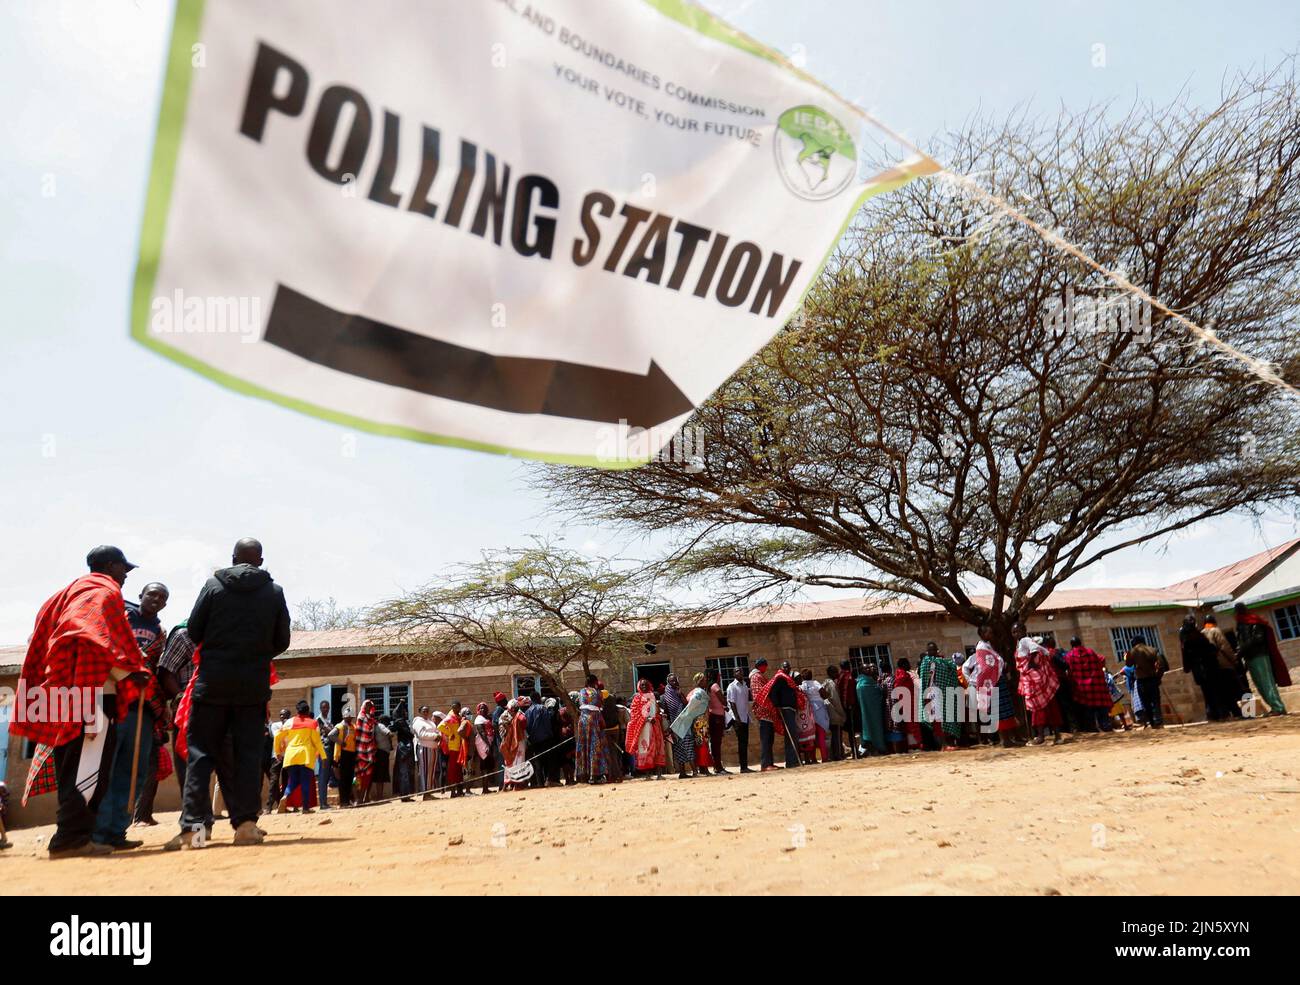 Maasai traditional people queue at a polling centre before casting their ballots during the general election by the Independent Electoral and Boundaries Commission (IEBC) in Ewaso Kedong primary school, in Kajiado county, Kenya August 9, 2022. REUTERS/Thomas Mukoya Stock Photo